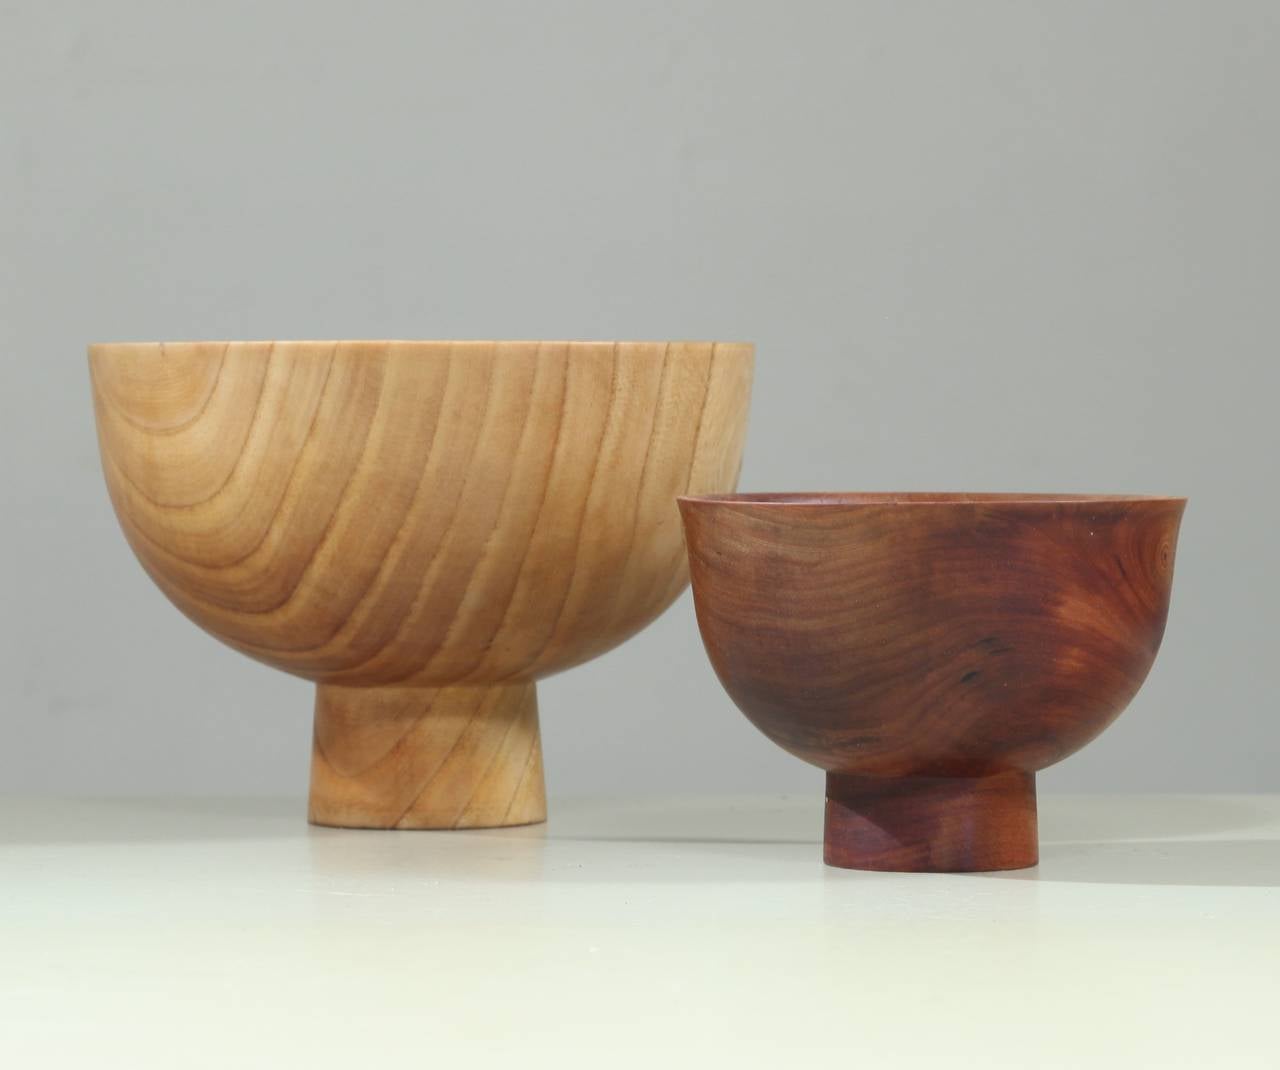 A pair of two wonderful turned bowls by American Woodworker Ed Miller.
Both items are signed with 'E.M.,' with the year they were made.

The largest bowl (1972) is made of a light wood with a beautiful grain and is 13.5 cm high, with a diameter